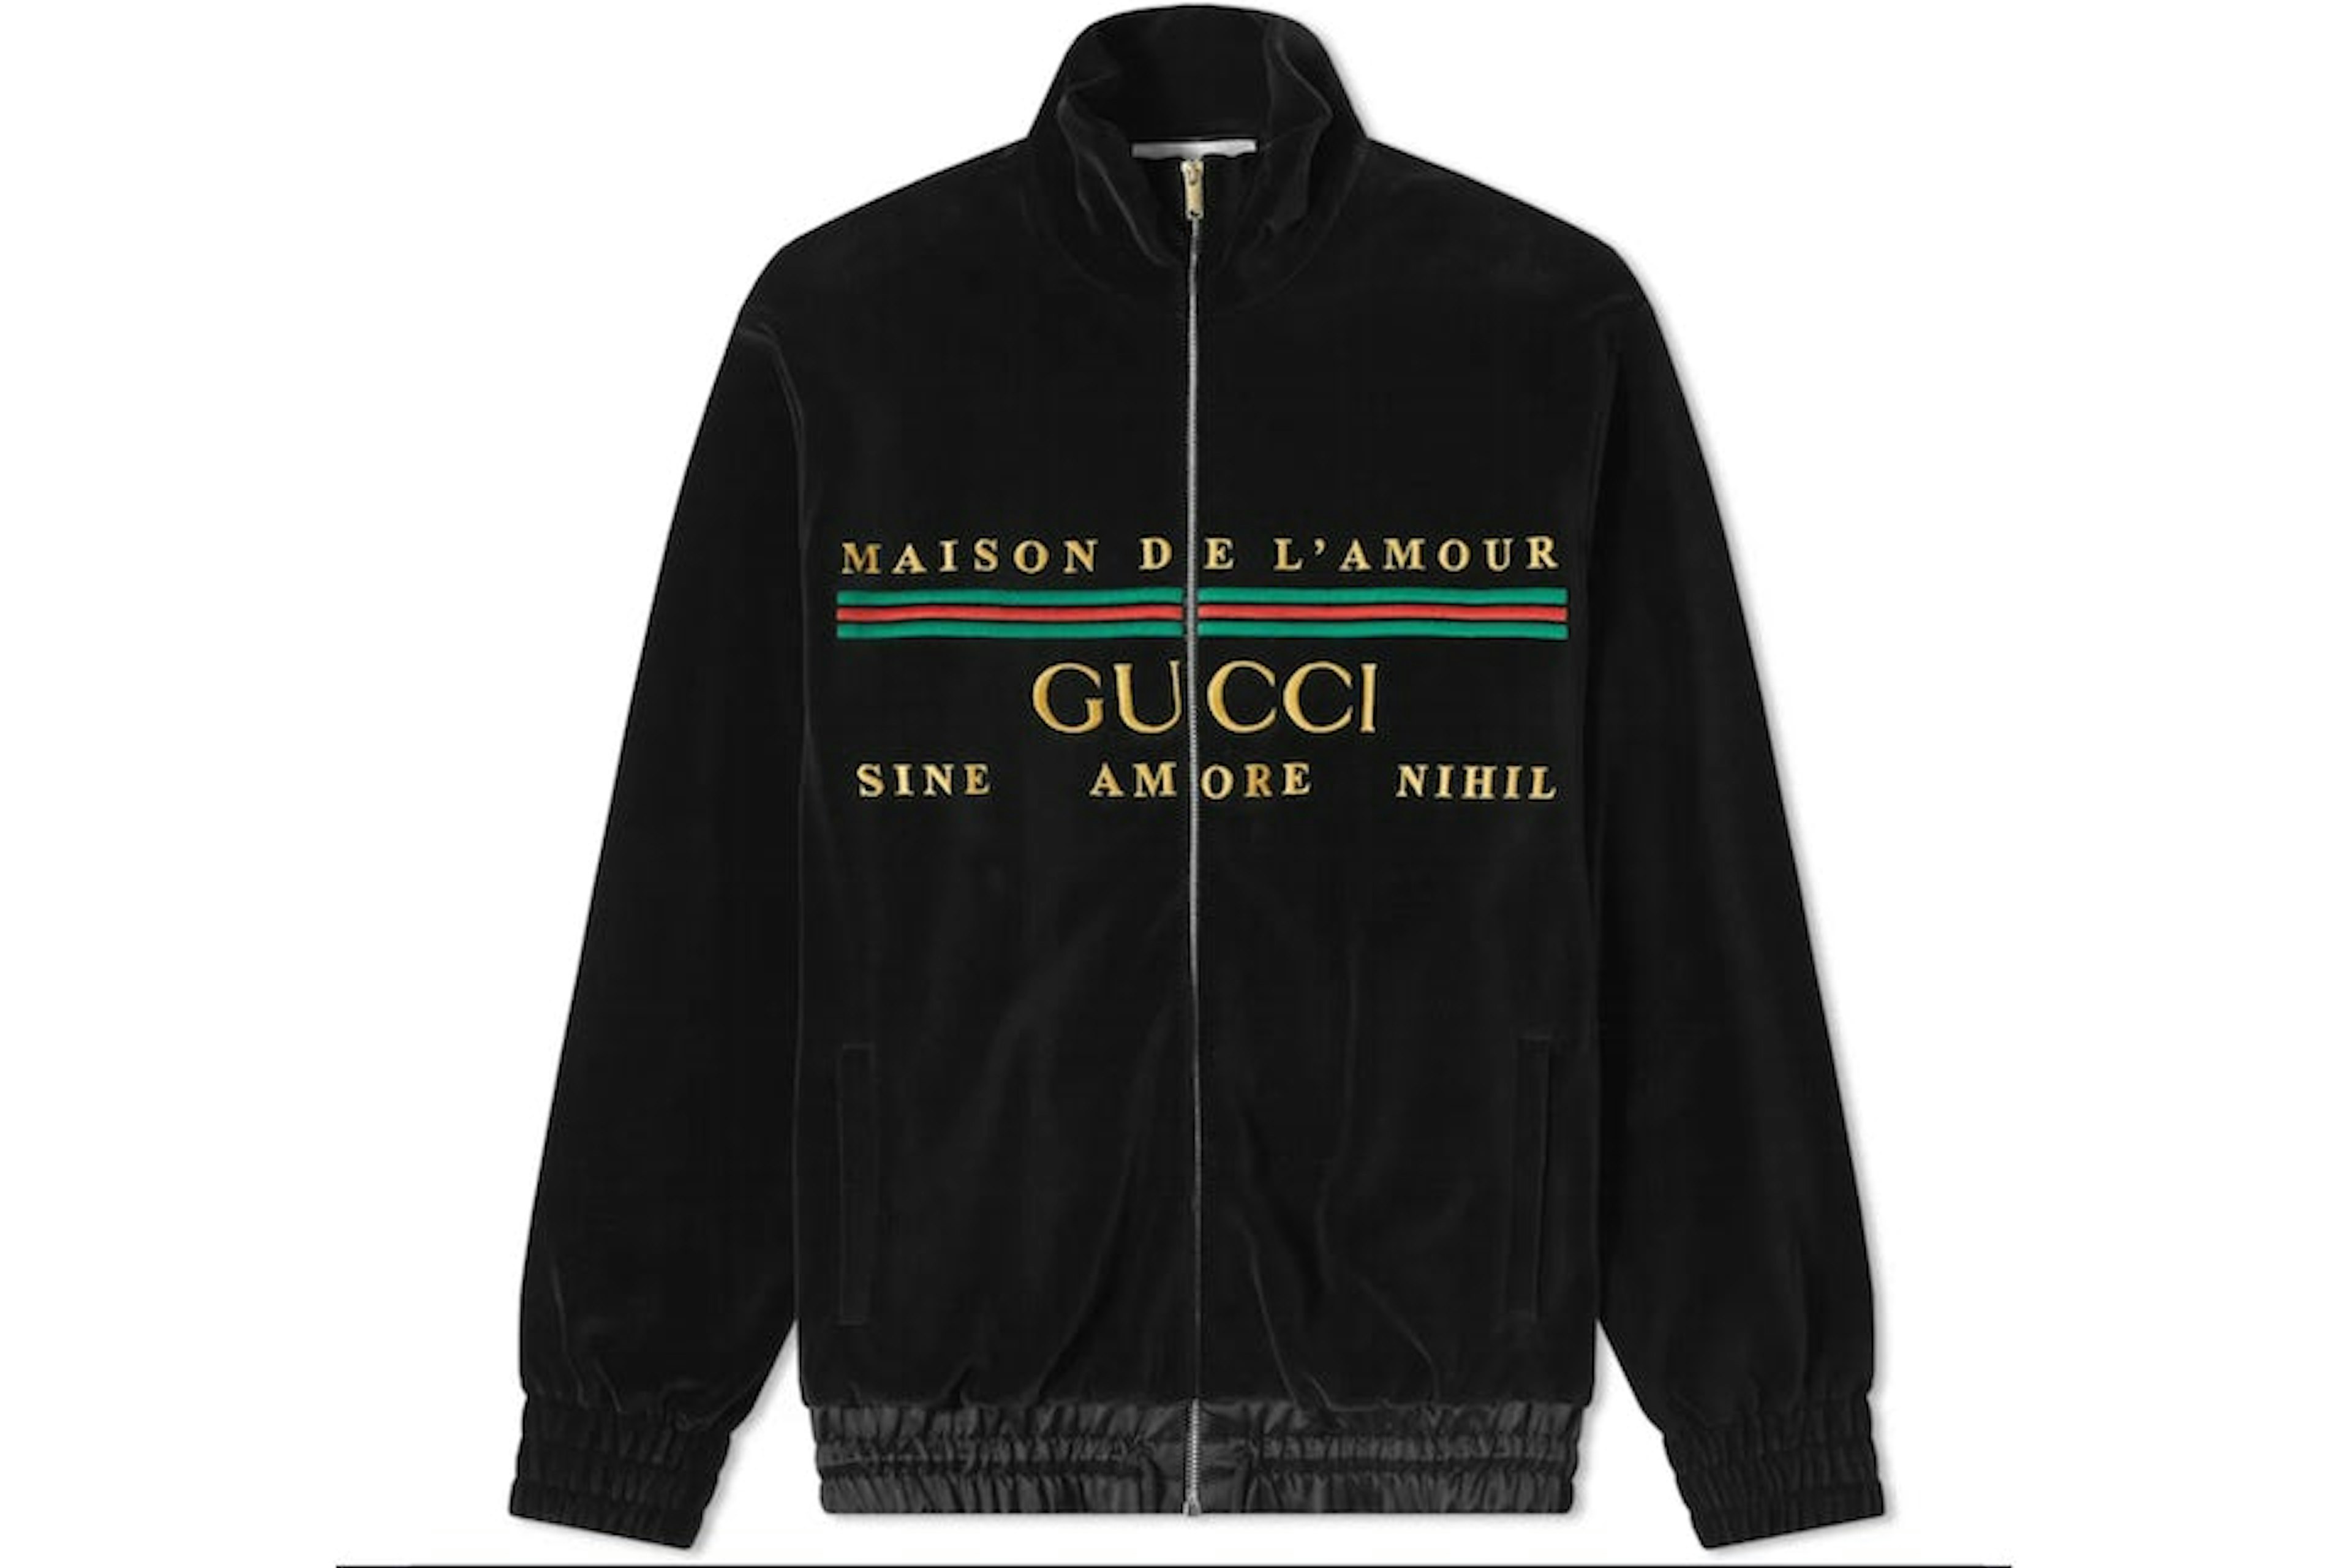 View - Full Sleeves Hooded Gucci Tracksuits price photos, Full Sleeves Hooded Gucci Tracksuits price available in Ahmedabad, make deal in 920